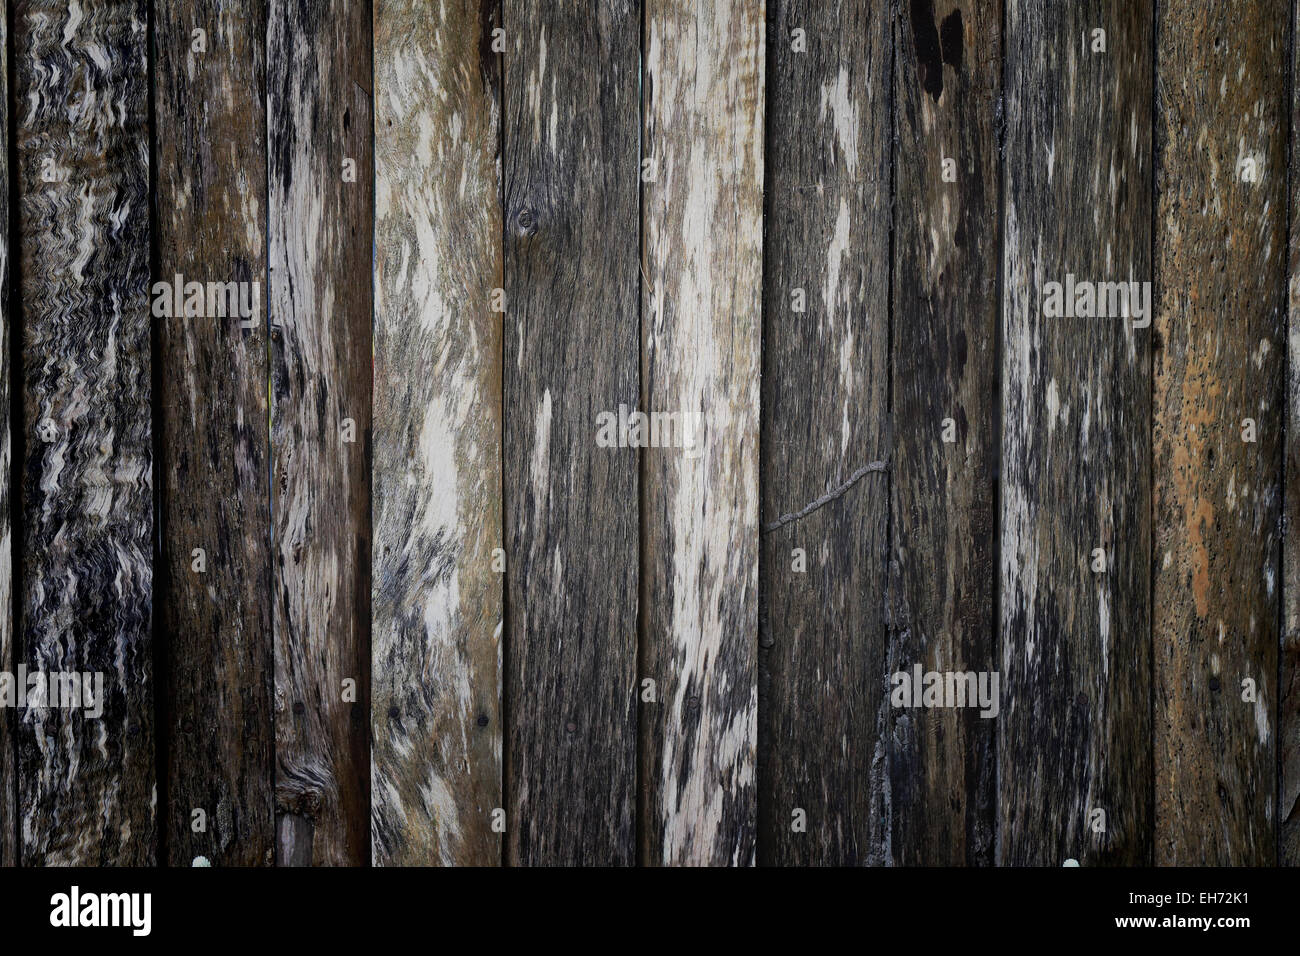 Old wooden wall for background image. Stock Photo